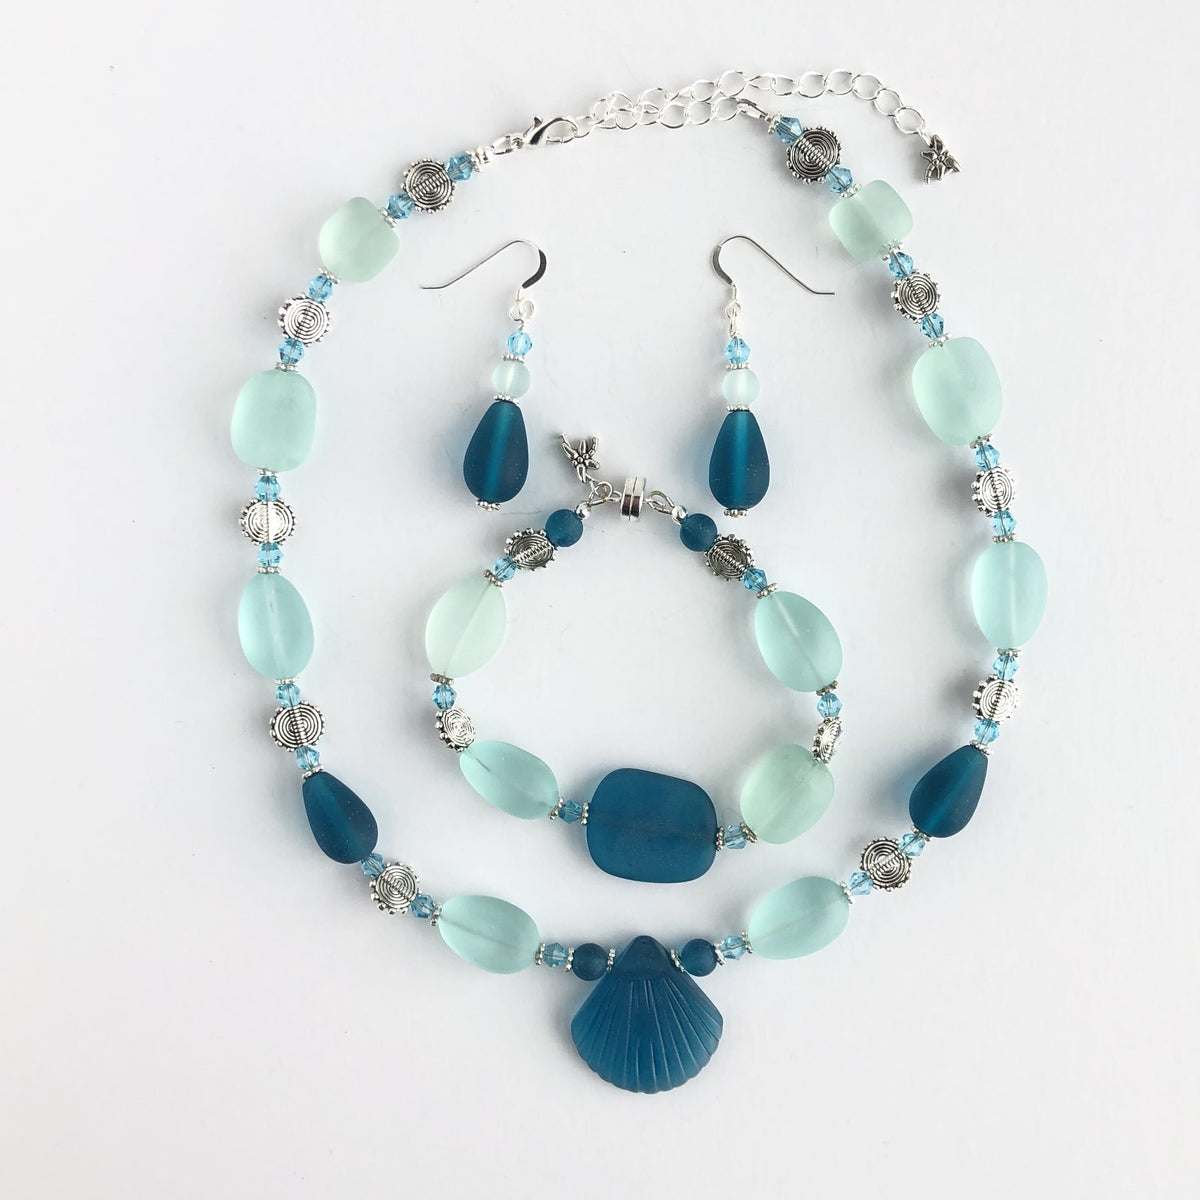 Sea Glass from By The Sea Jewelry - Earrings • Necklaces • Bracelets • Rings